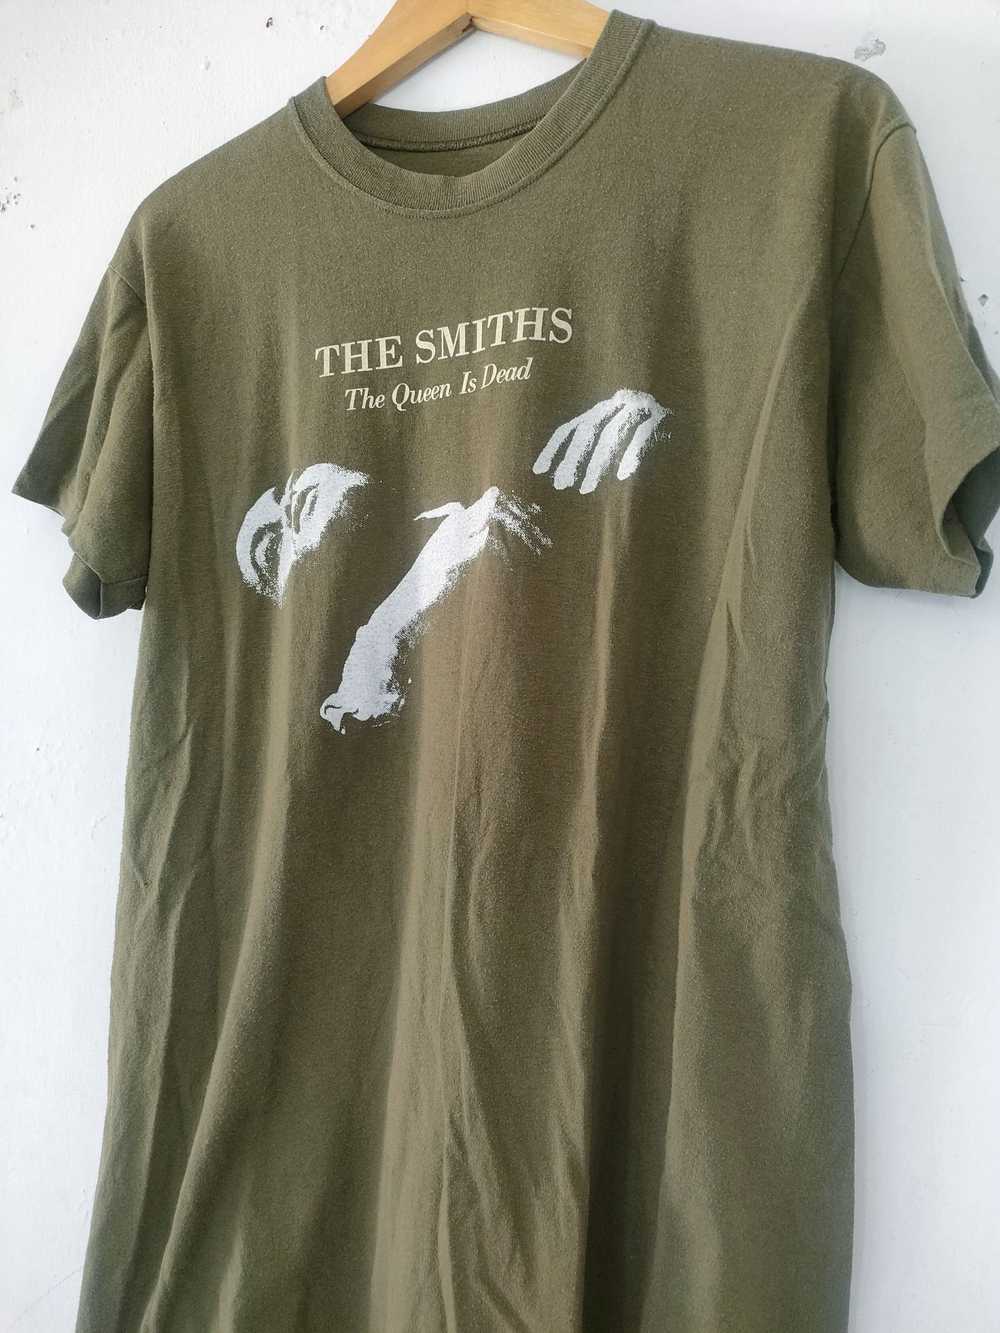 Band Tees × Morrissey × The Smiths THE SMITHS 'TH… - image 7